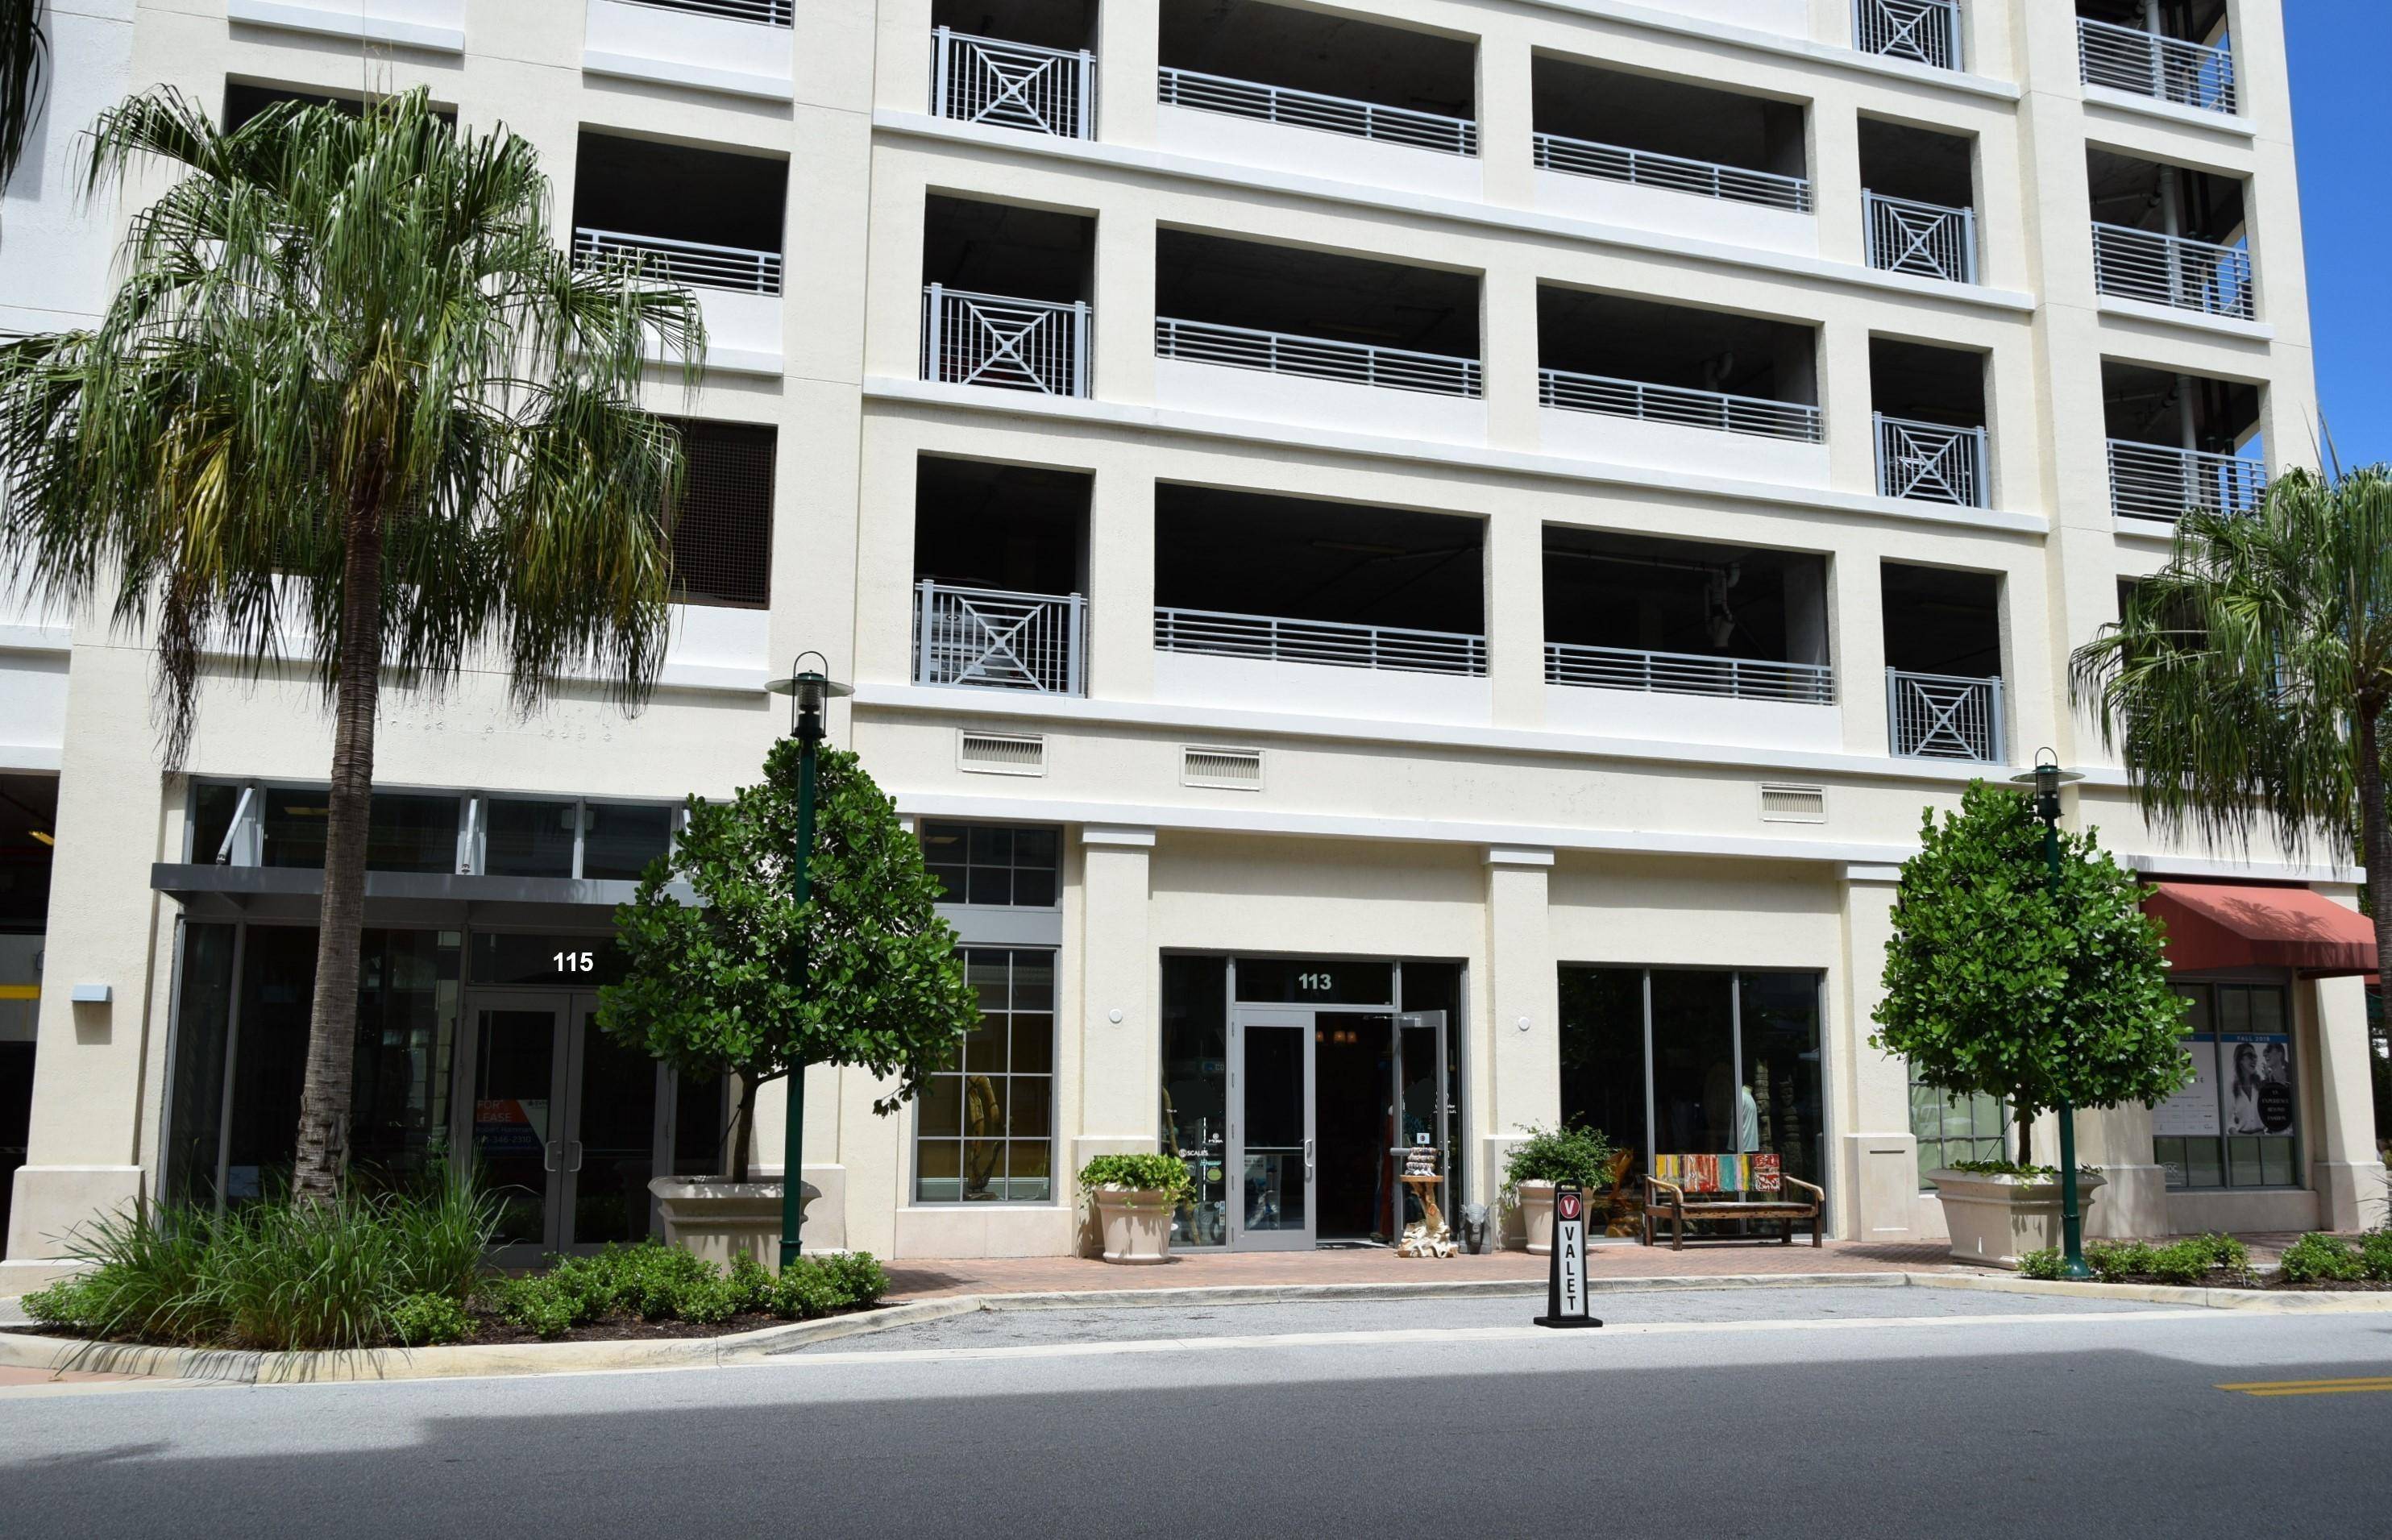 3, 723 SF retail office space located across from The Wyndham Grand, and by The Woods.